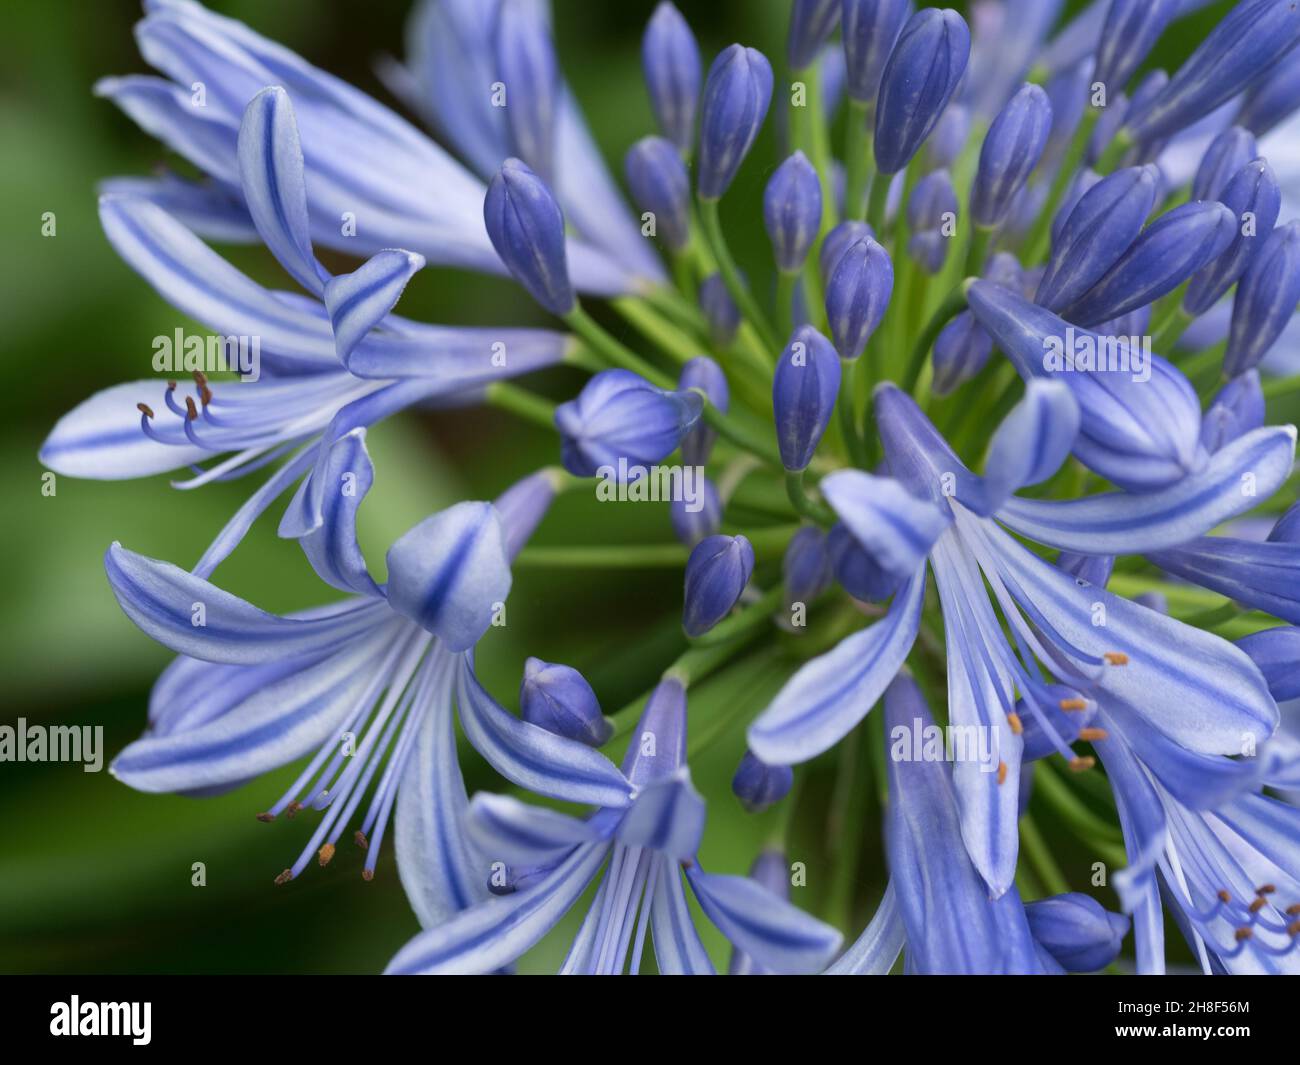 Flowers, Purple Blue Agapanthus plant  and green foliage in bloom. Flowering near the end of spring. Stock Photo